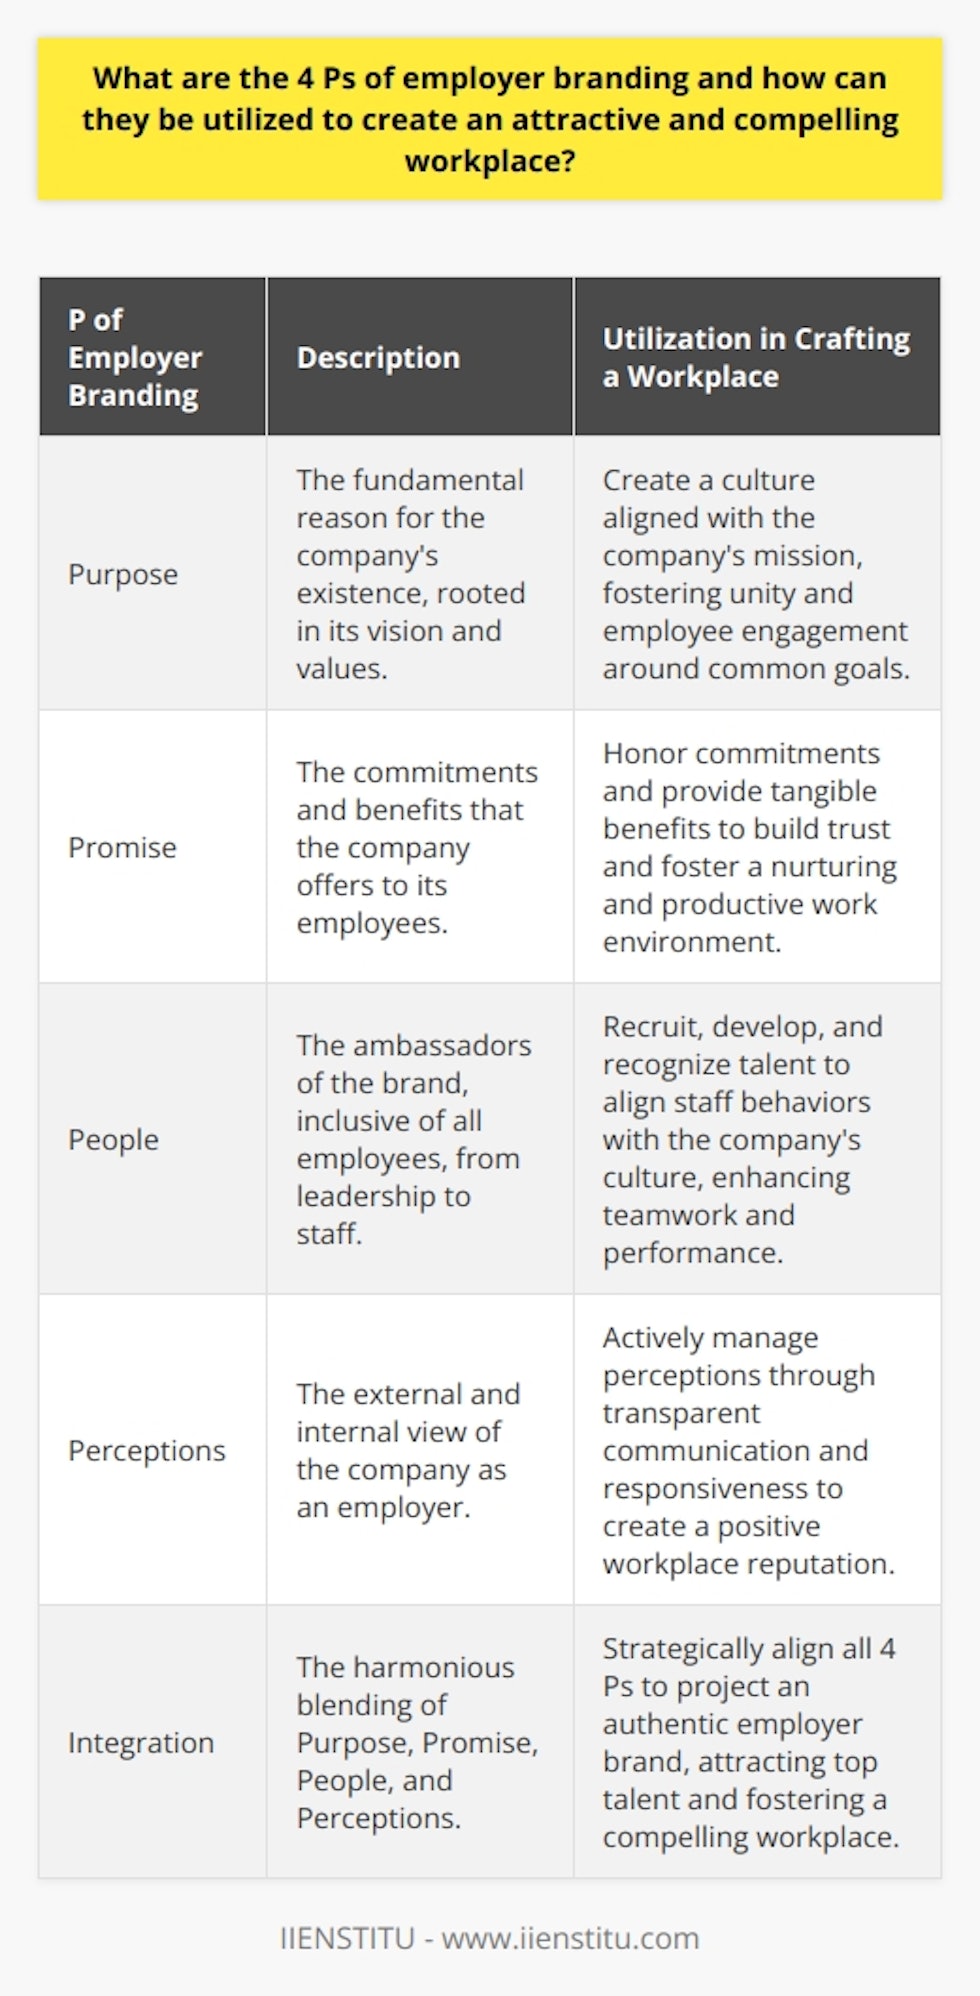 The 4 Ps of Employer Branding: Crafting an Irresistible WorkplaceEmployer branding is akin to a beacon, shining to attract the best and brightest in a sea of competing companies. This branding is not merely a marketing buzzword but a strategic approach that positions a company as an employer of choice. To delve deeper into this concept, let's unpack the 4 Ps of employer branding: Purpose, Promise, People, and Perceptions, and how they can be orchestrated to create a workplace that resonates with excellence.Purpose: The Heartbeat of Vision and ValuesAn employer's purpose is a compelling force; it answers the 'why' behind the company's existence. This purpose goes beyond profit -- it is the heartbeat of the company's vision and values. A clearly articulated purpose fuels a culture that employees want to be part of. It aligns their personal ambitions with the organizational mission, fostering a sense of unity and engagement. Employers who leverage their purpose effectively can rally their workforce around shared goals, cultivating a workplace that's not just about jobs, but about contributing to something greater.Promise: The Covenant With EmployeesA company's promise constitutes the commitments and benefits it offers. This is the employer's pledge to its staff, encompassing everything from developmental opportunities to well-being initiatives. An authentic promise is not a lofty, unattainable ideal but a tangible set of expectations that the company must honor. By delivering on its promise consistently, an employer can build a resilient bond of trust and create a workplace that's as nurturing as it is productive. Employers who neglect their promises risk undermining their brand and eroding employee loyalty.People: The Embodiment of the BrandPeople are the living, breathing embodiment of an employer's brand. They are the ambassadors, whose behaviors and attitudes reflect the organizational culture. The importance of the people aspect cannot be overstated; from the leadership exemplifying the company's values to employees fostering teamwork and support, the human element is pivotal. By prioritizing the recruitment, development, and recognition of top talent, the employer can sculpt a workforce that's both skilled and aligned with the brand's ethos, making the workplace an environment where individuals thrive collectively.Perceptions: The Reflection of RealityFinally, perceptions are the mirror through which the world views an employer. This is the culmination of how the company presents itself, but also how others -- employees, clients, and the public -- perceive and talk about the company. Effective perception management requires active listening, transparent communication, and responsiveness to feedback. Creating a positive perception is an ongoing process that can lead to a workplace radiating with positivity, one that current employees take pride in and prospective talent is drawn to.Utilizing the 4 Ps to foster an attractive and compelling workplace demands strategic thought and authentic action. It is a meticulous blend of projecting a purposeful image, delivering on promises, nurturing a people-centric culture, and managing perceptions with integrity. Companies such as [IIENSTITU](https://www.iienstitu.com/) emphasize the importance of such frameworks in creating branding strategies that resonate with today's dynamic workforce. By mastering the delicate symphony of the 4 Ps, employers can harmonize their brand's melody, compelling the finest minds to join their orchestra, and crafting a workplace that's as magnetic as it is meaningful.